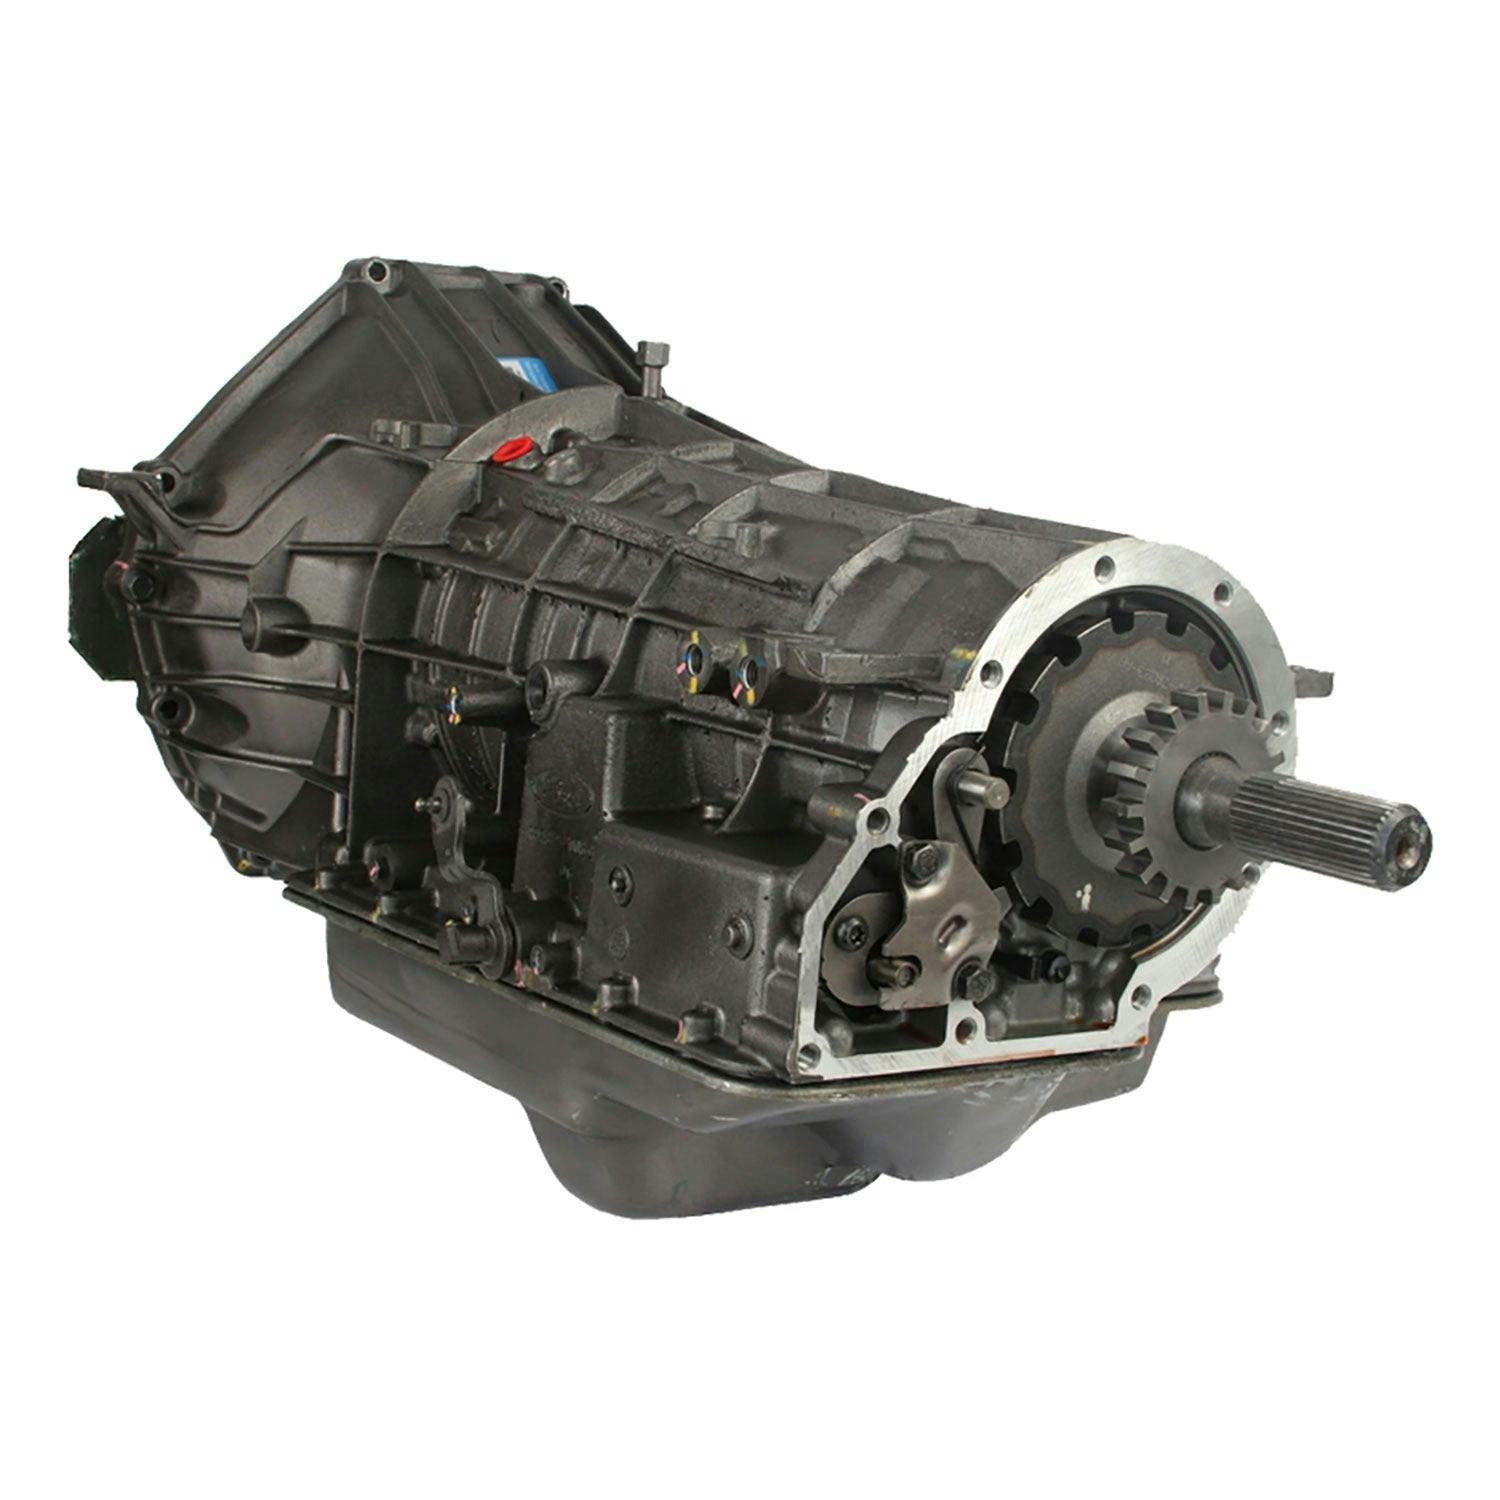 Automatic Transmission for 2004 Ford E-350 Super Duty, E-450 Super Duty RWD with 6.8L V10 Engine